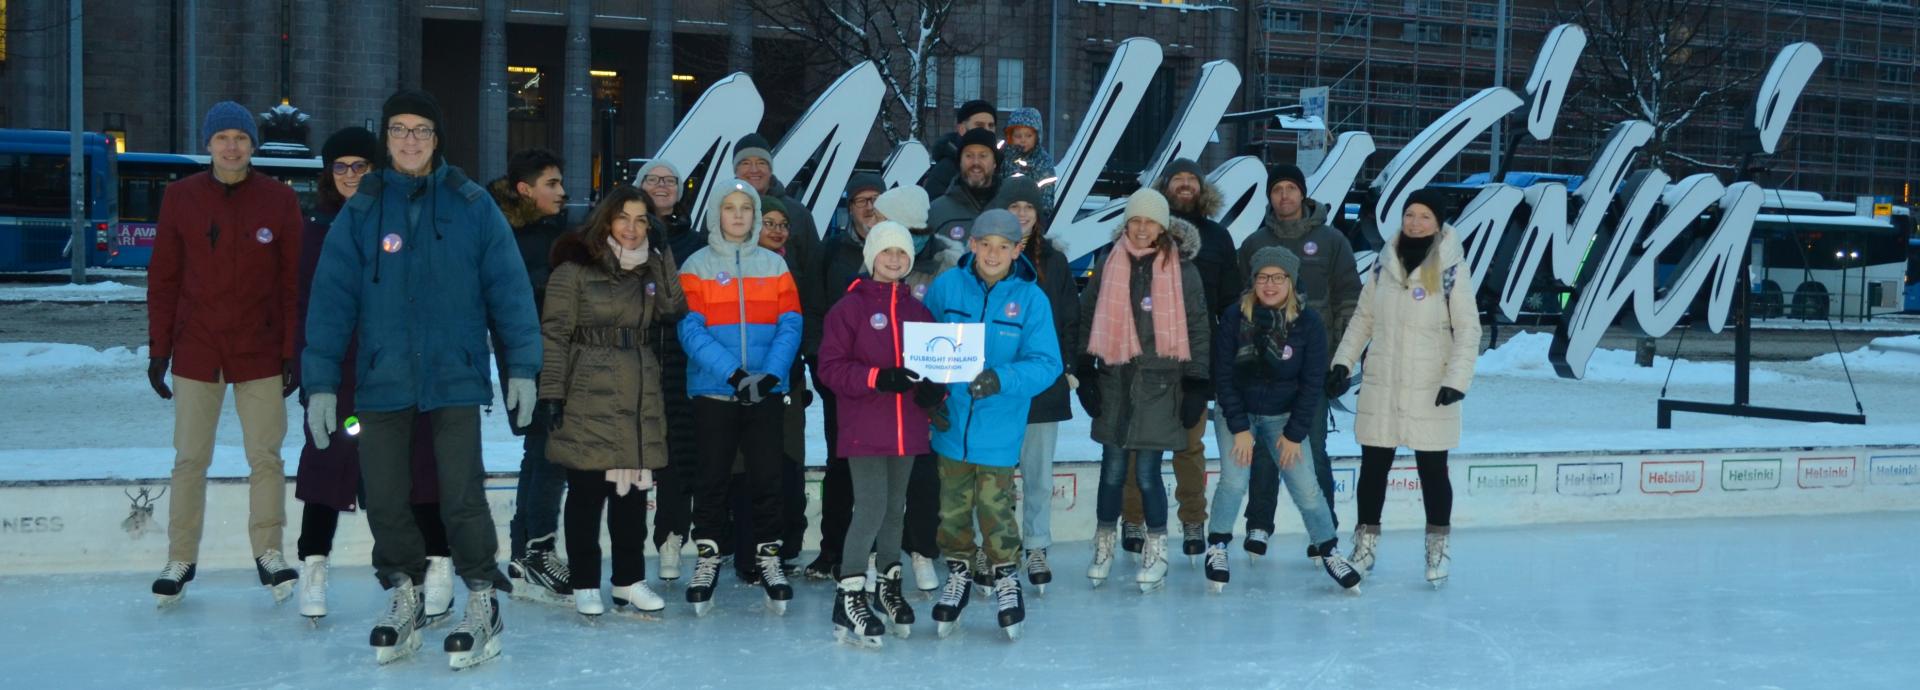 Members of the ASLA-Fulbright Alumni Association and 2018-2019 U.S. Fulbright Finland grantees ice skating